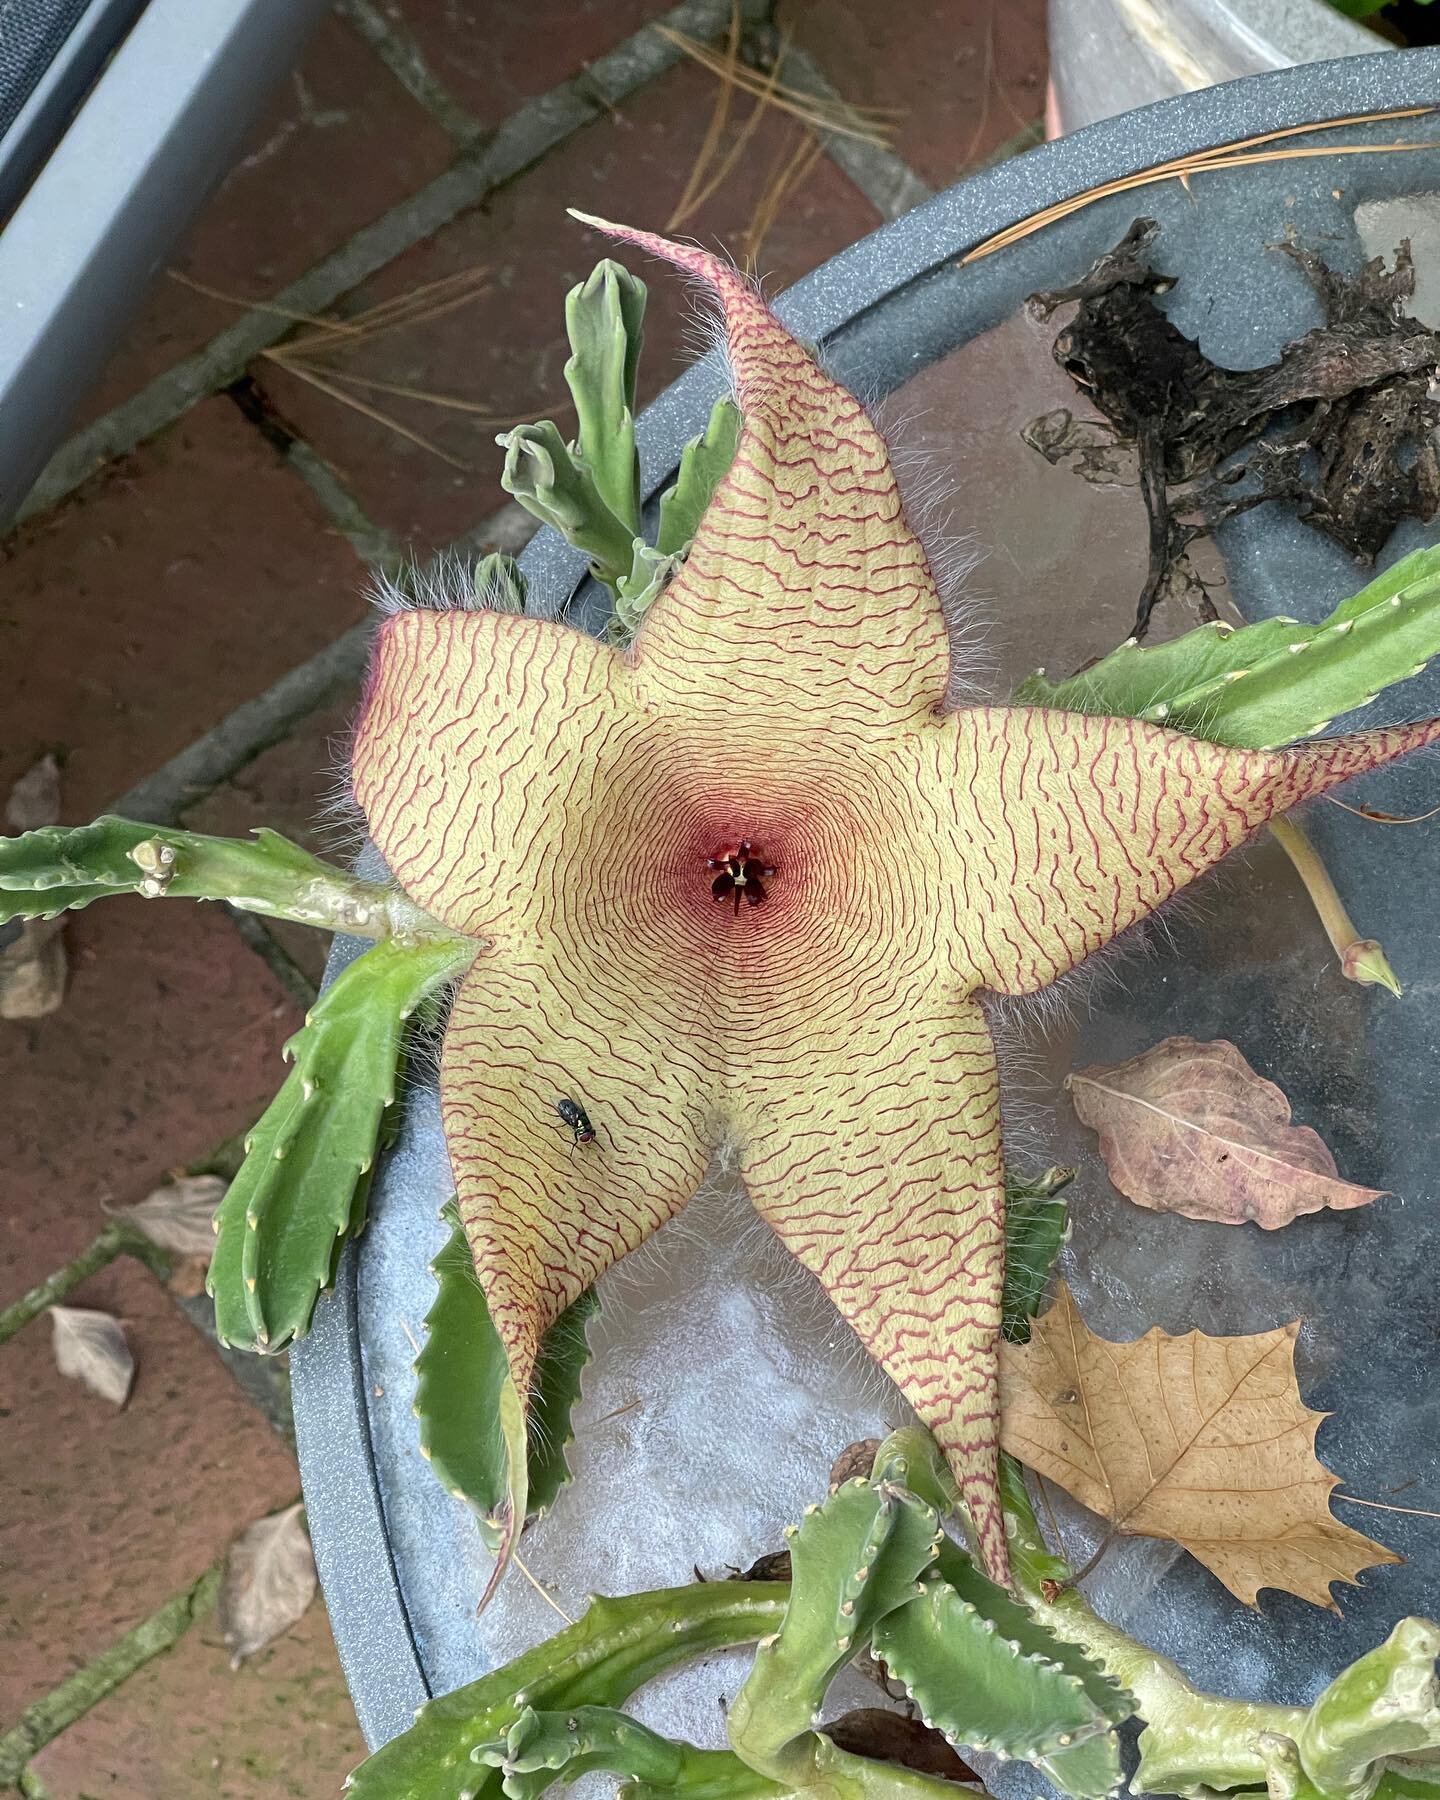 This my rotting flesh plant who lives outside because, you guessed it, it stinks. Flies love it and are it&rsquo;s pollinators. But my who backyard patio stinks! The plant had three blossoms this year and from top to tip it measures a foot across. Is